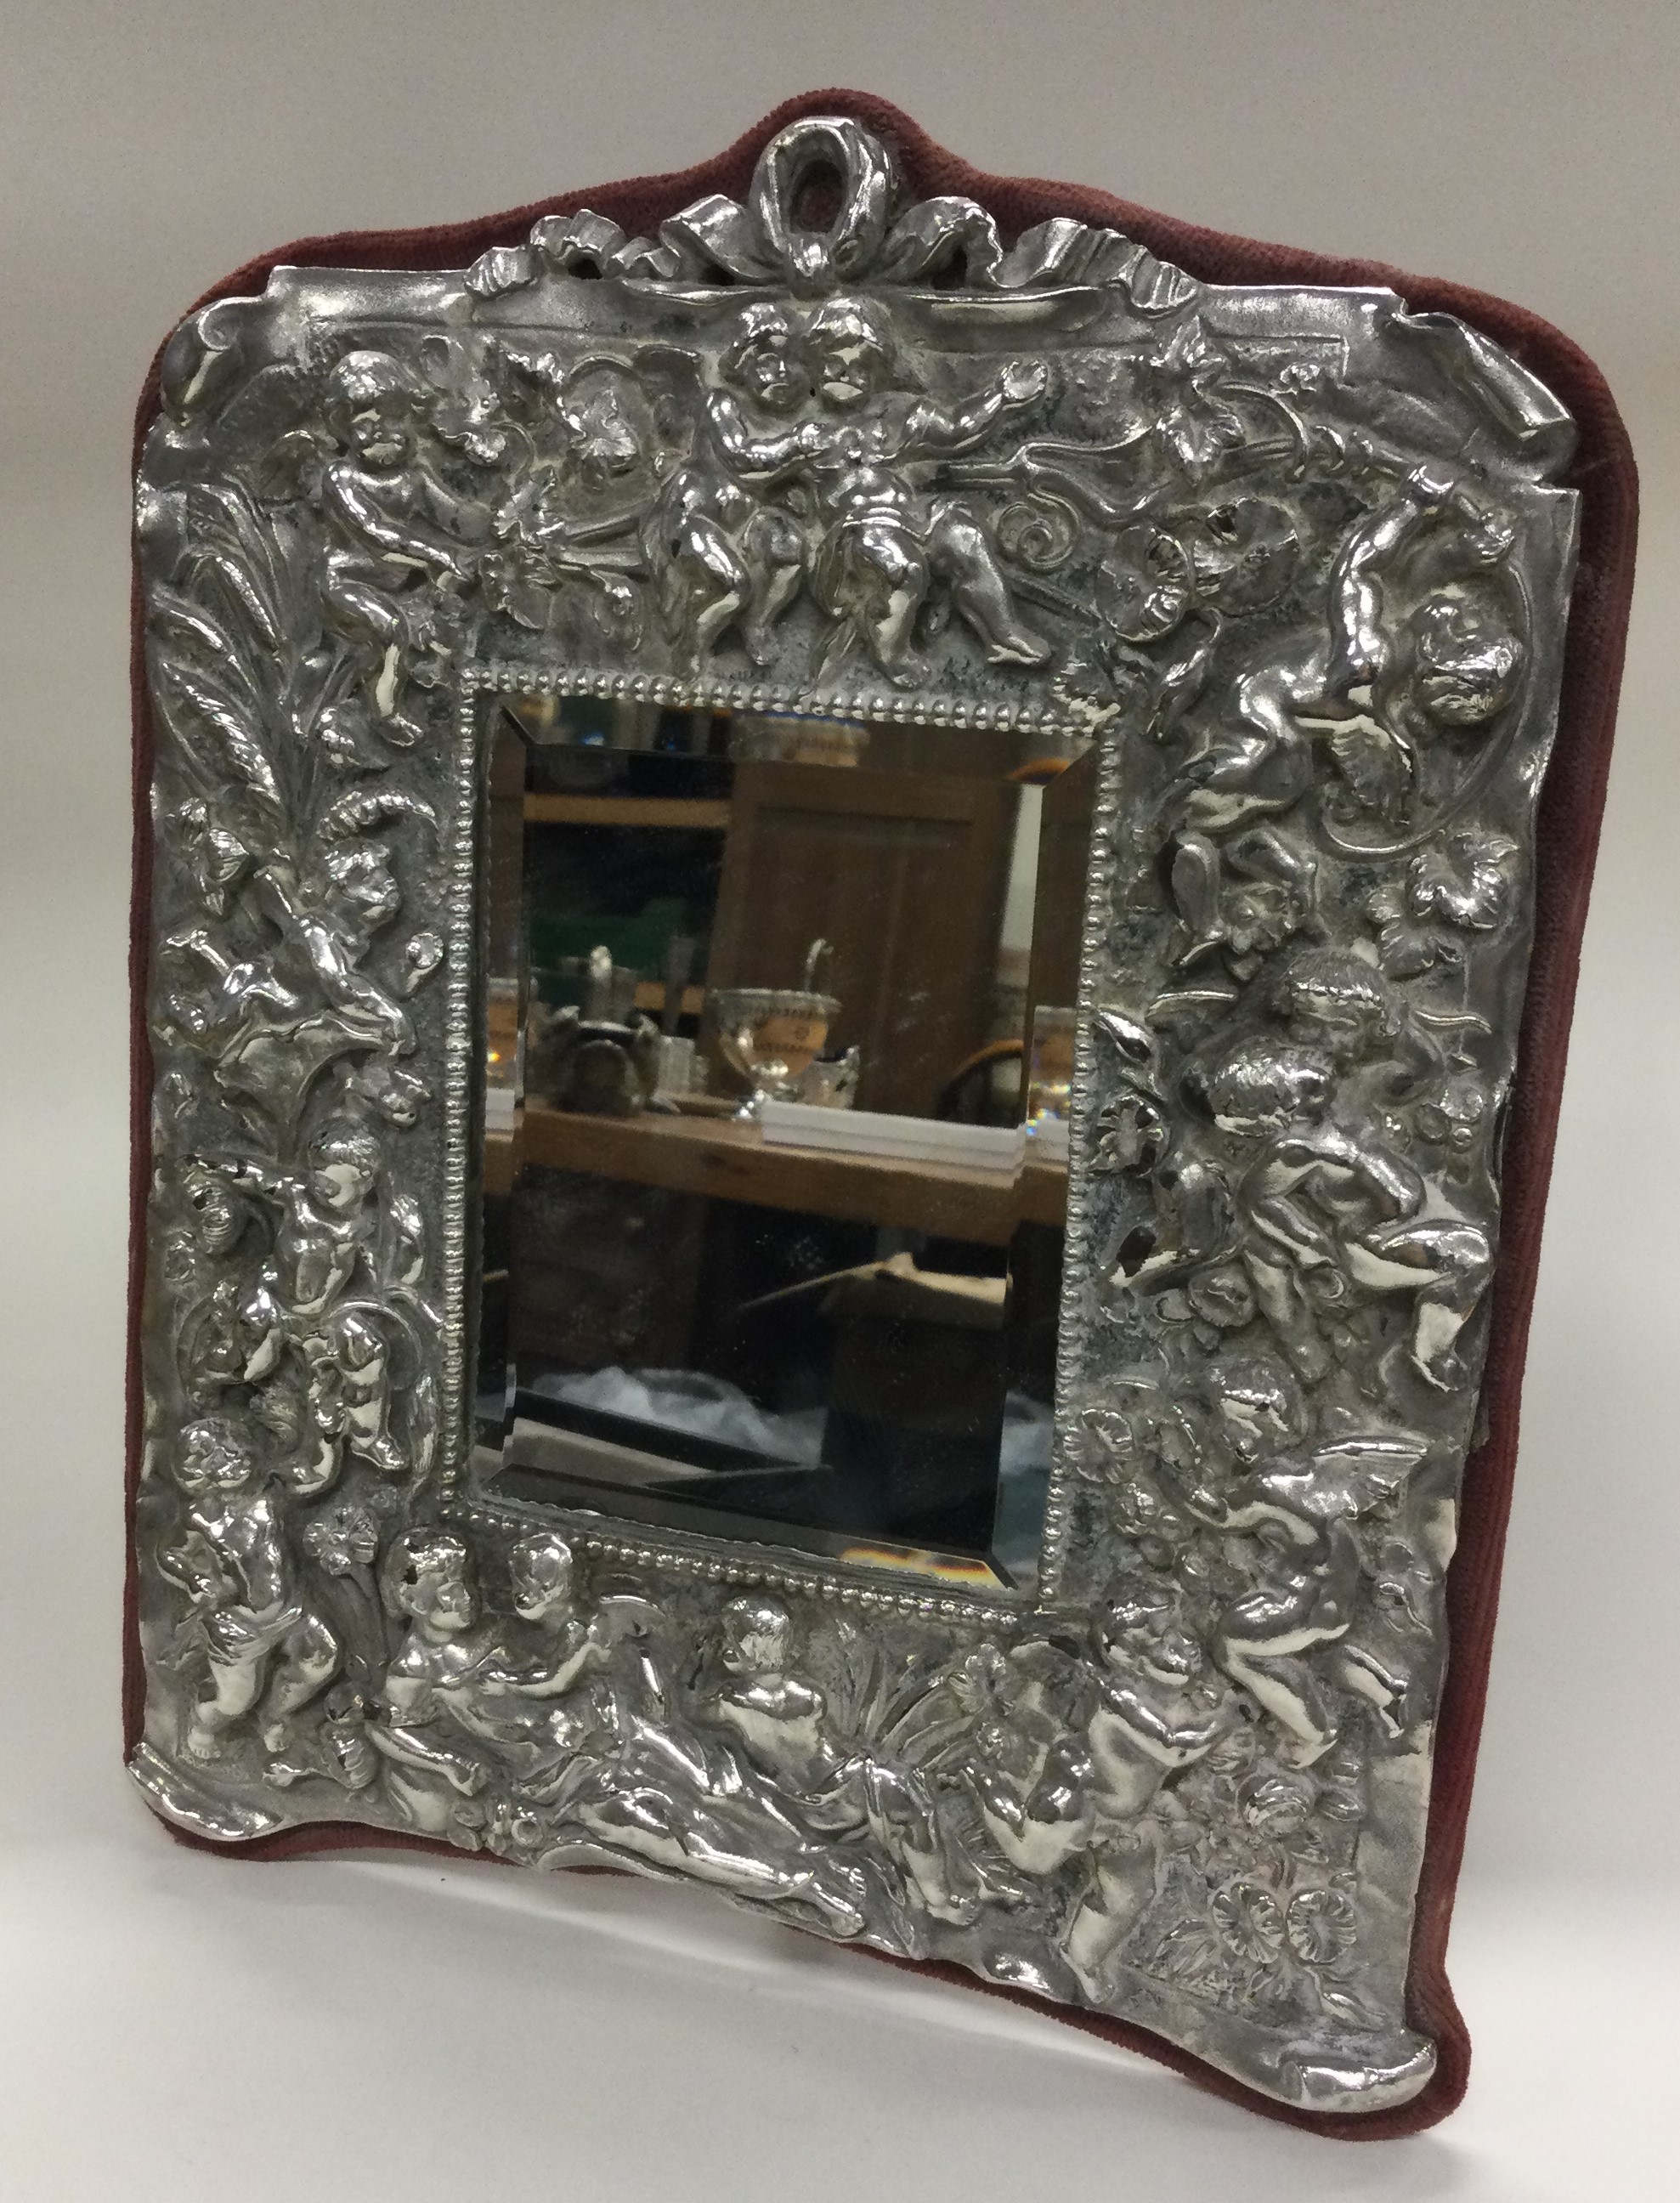 A silver backed mirror embossed with cherubs. - Image 2 of 2